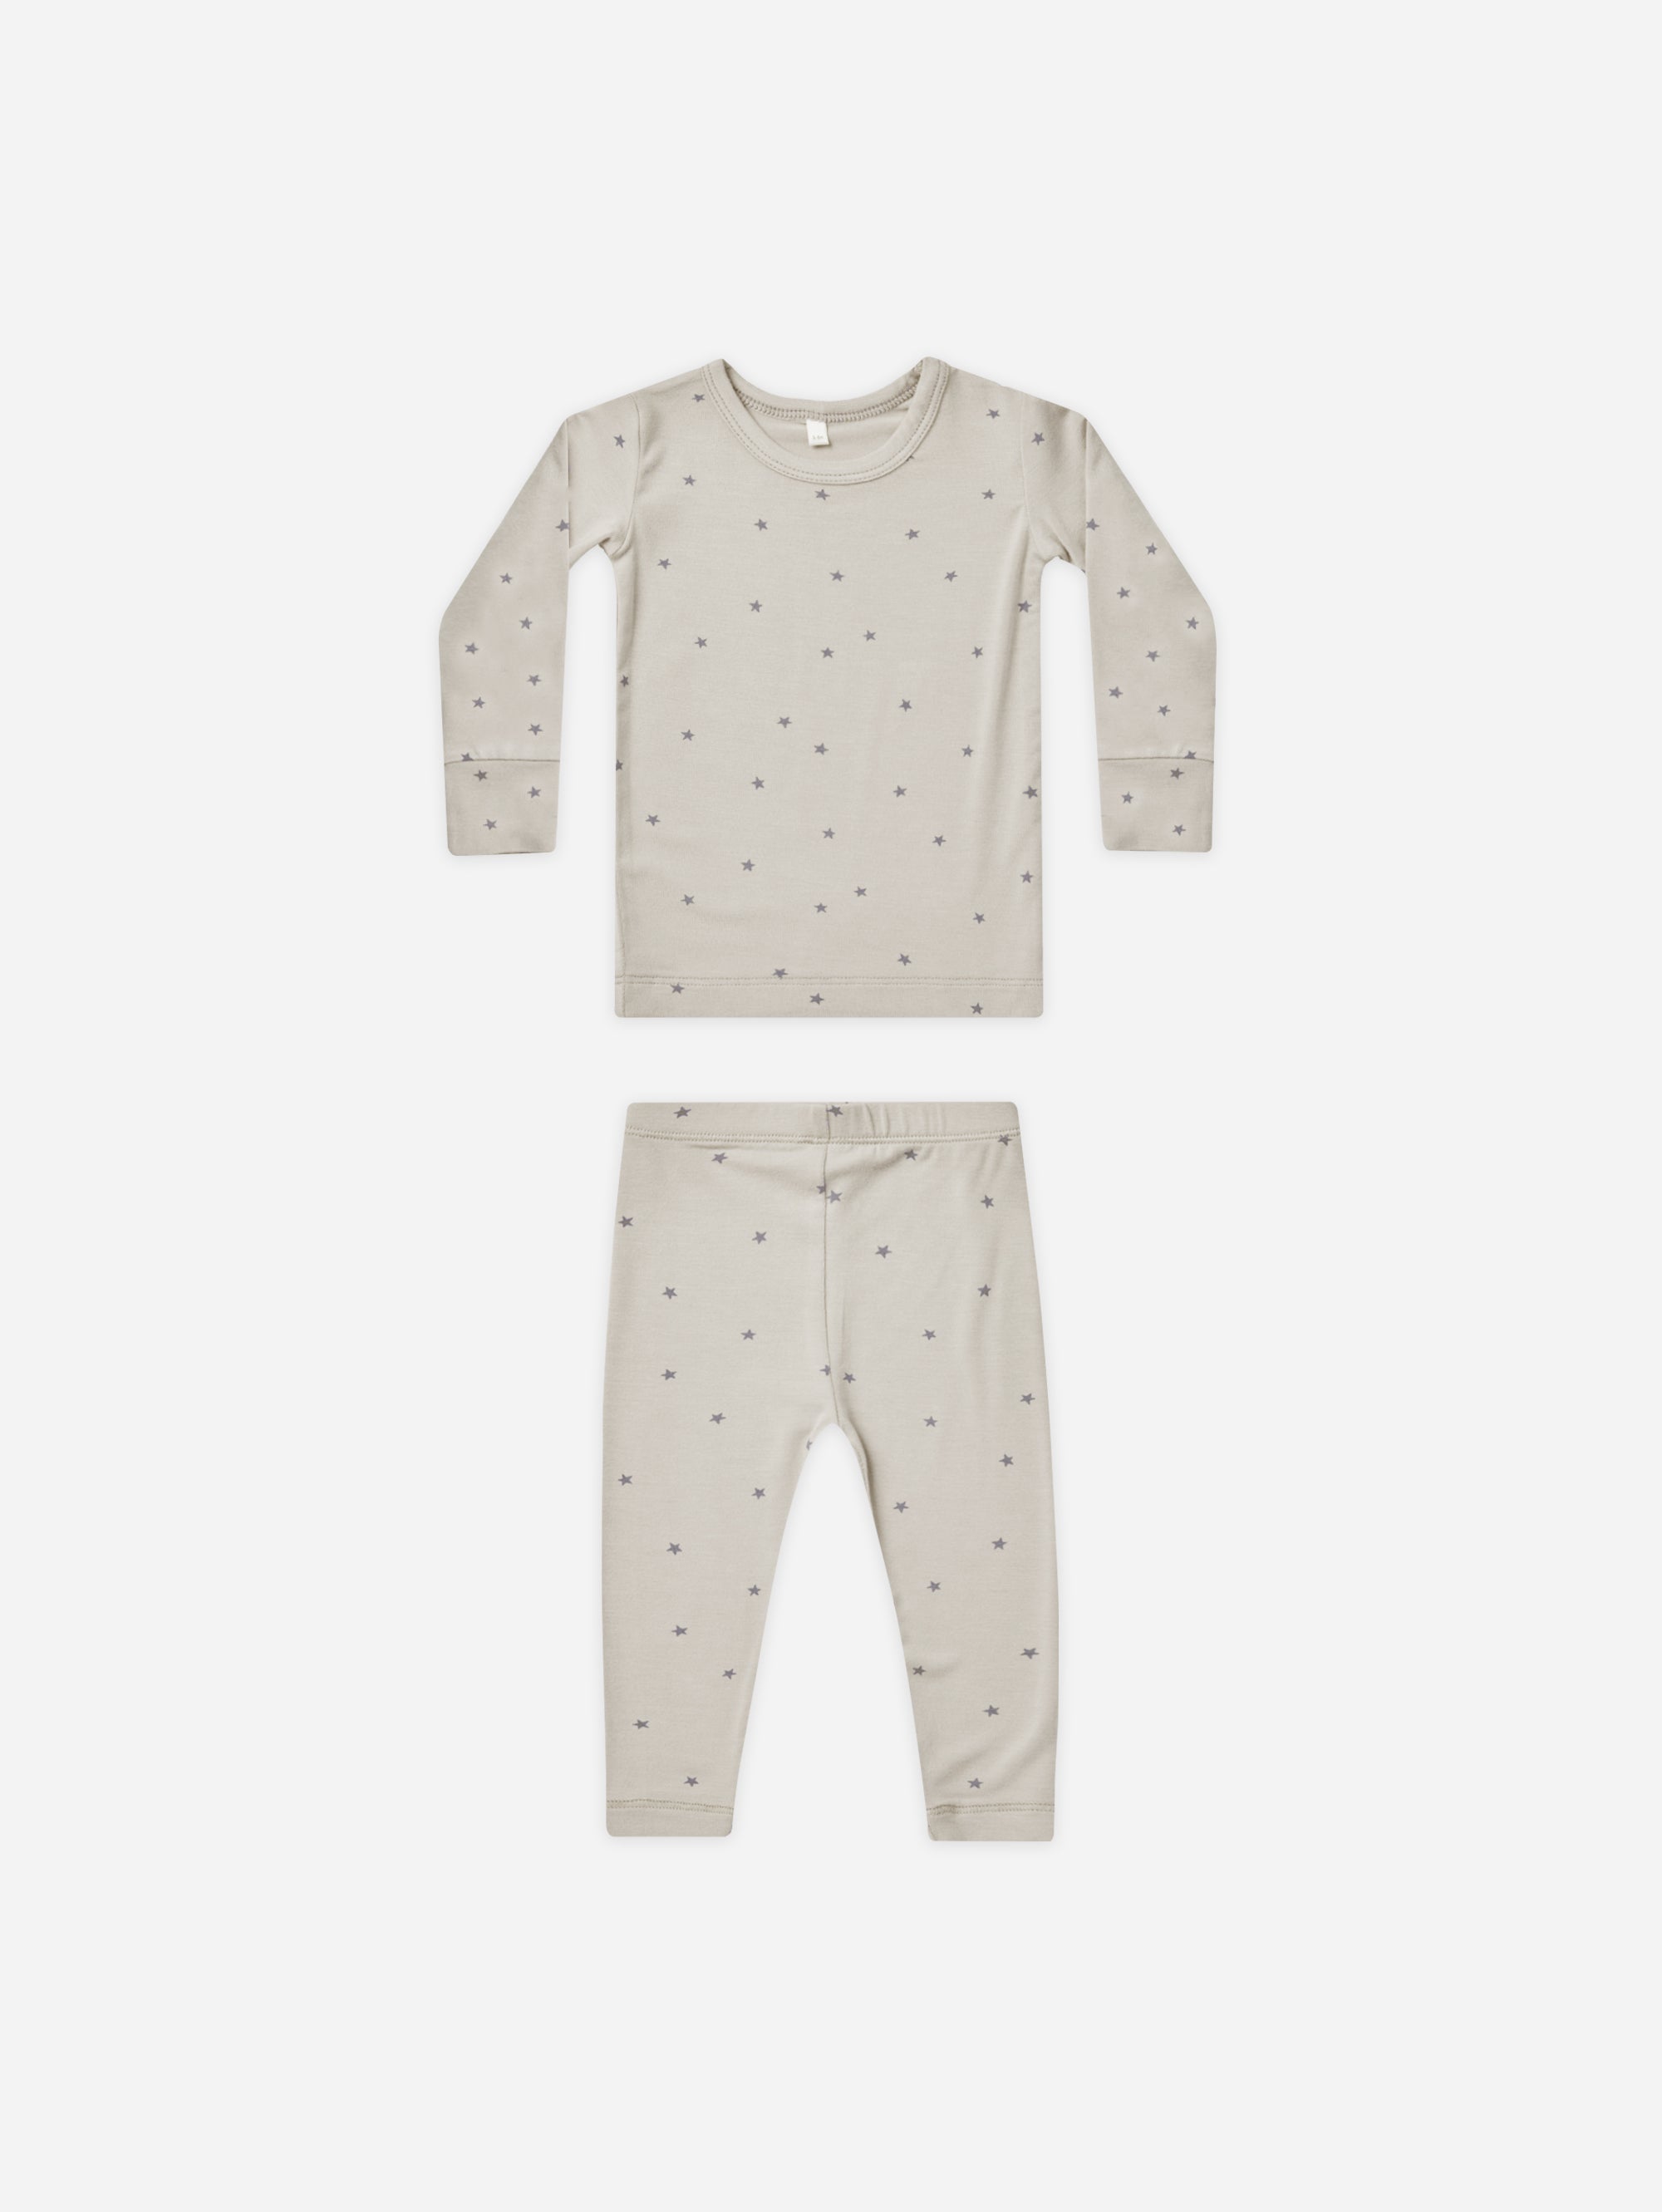 Bamboo Long Sleeve Pajama Set || Stars - Rylee + Cru | Kids Clothes | Trendy Baby Clothes | Modern Infant Outfits |